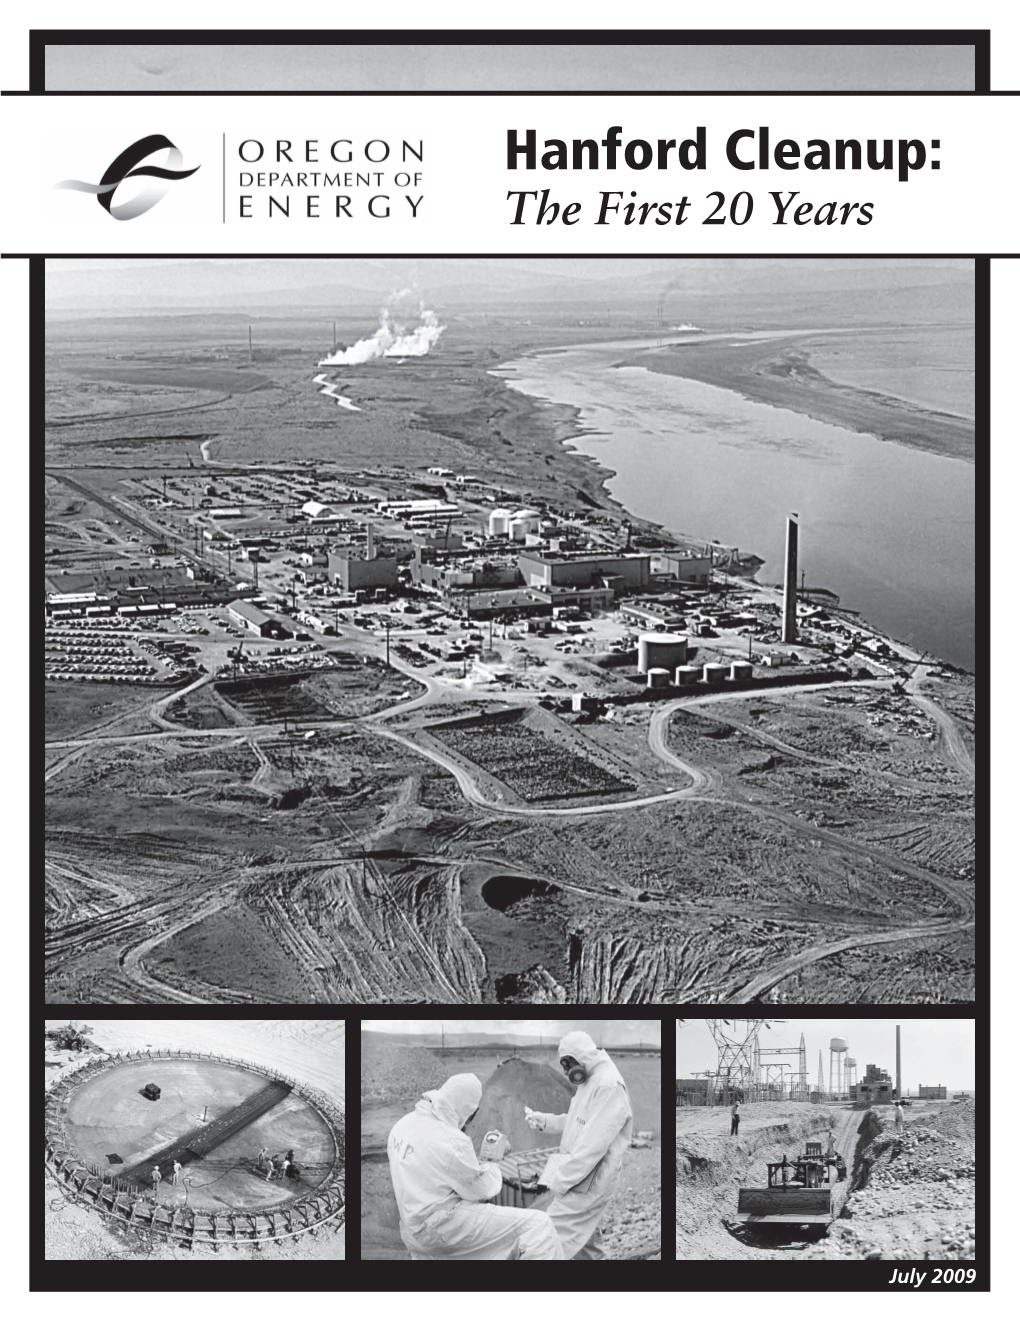 Hanford Cleanup: the First 20 Years